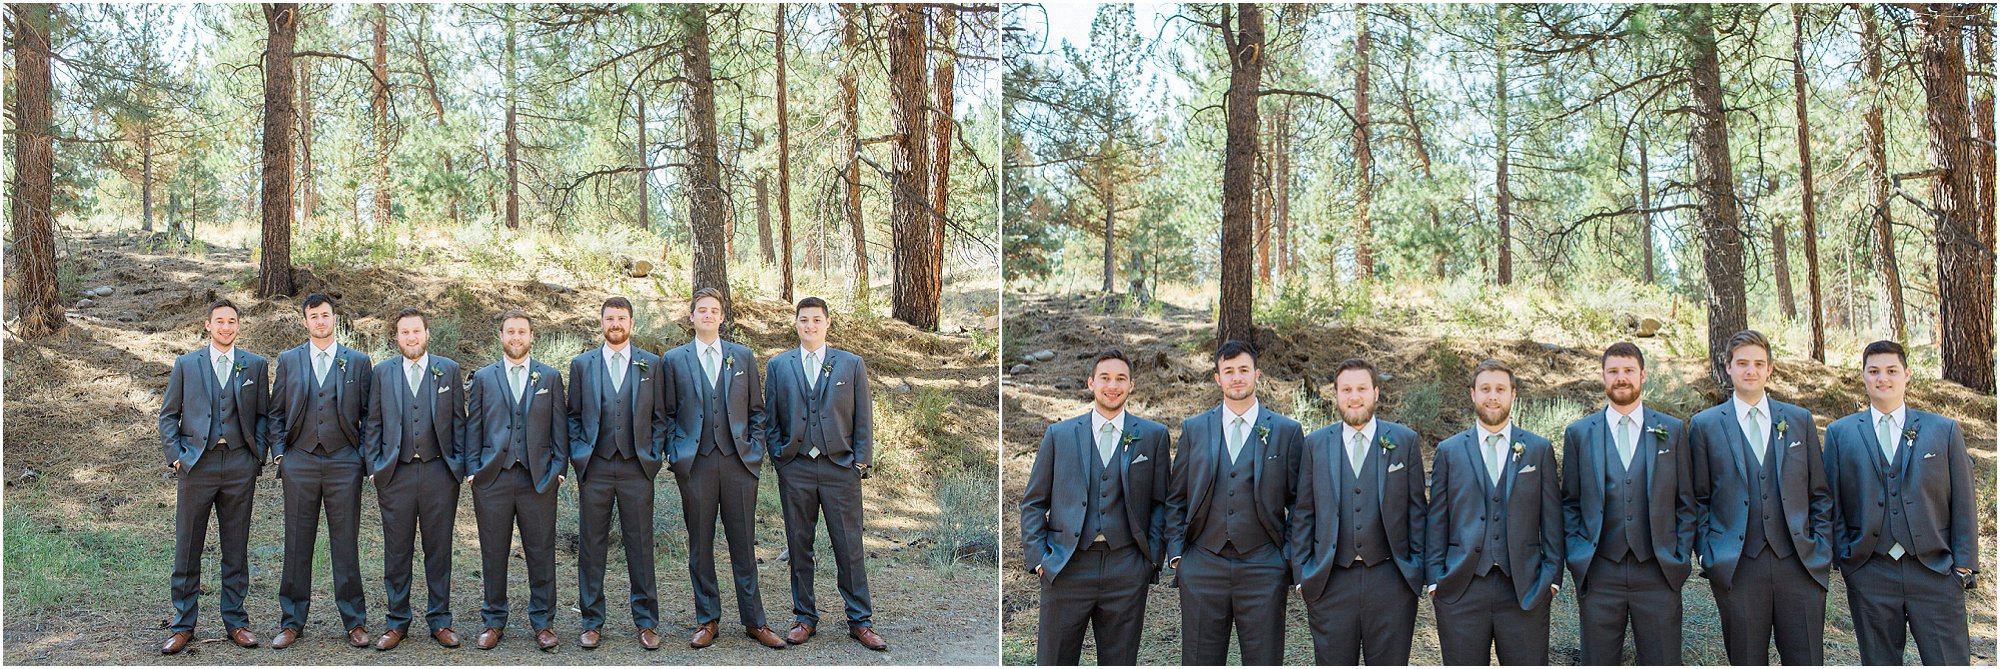 Handsome fellas at this Oregon wedding at Aspen Hall photographed by Bend wedding photographer Erica Swantek Photography. 